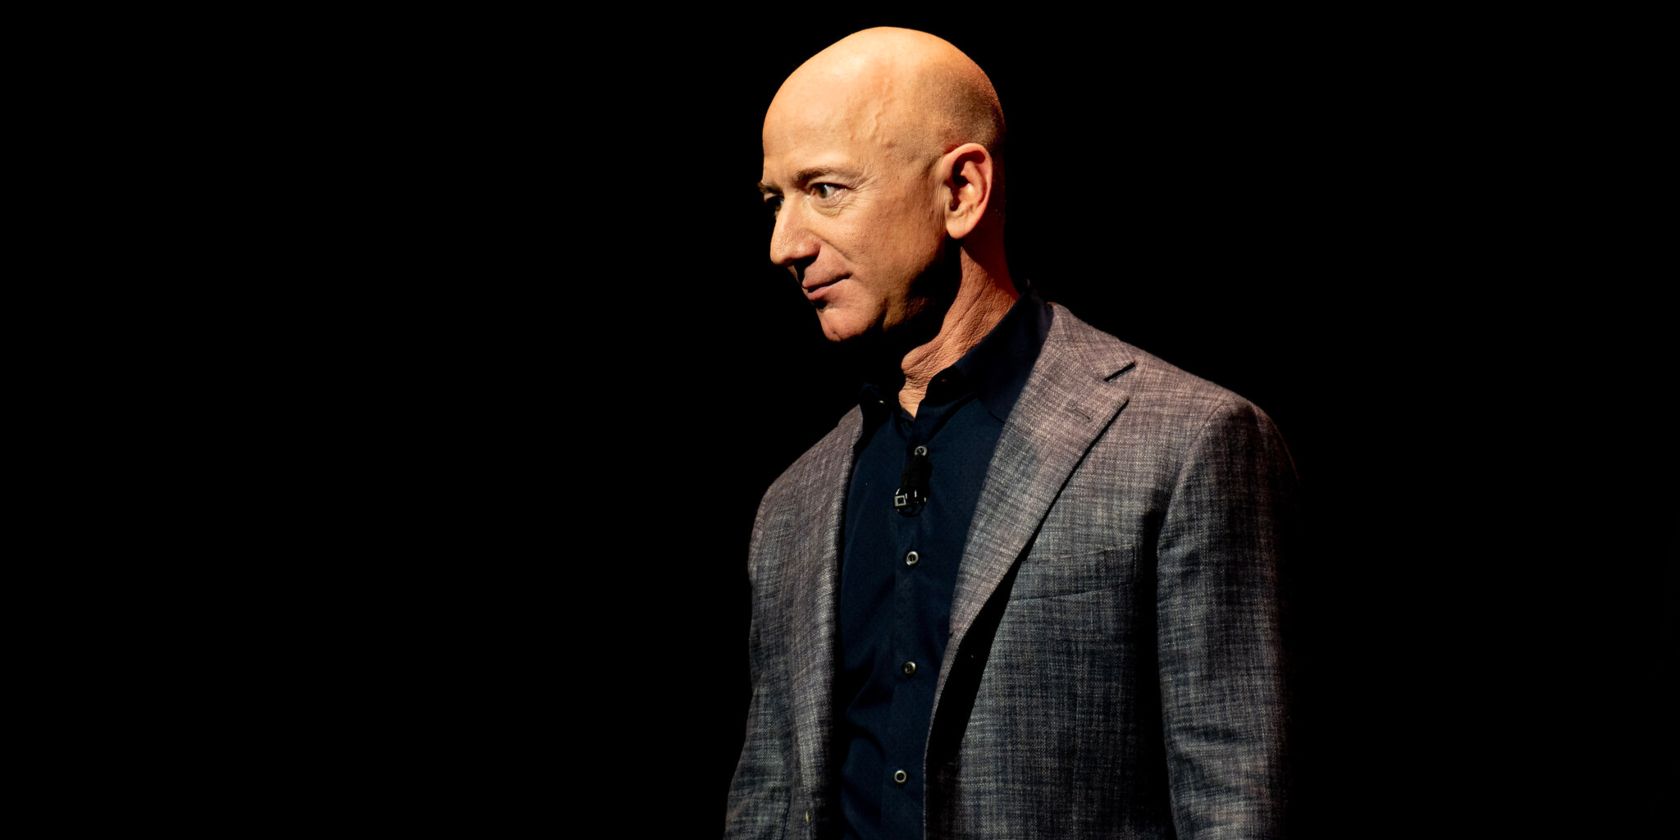 Jeff Bezos wearing a suit with a dark background